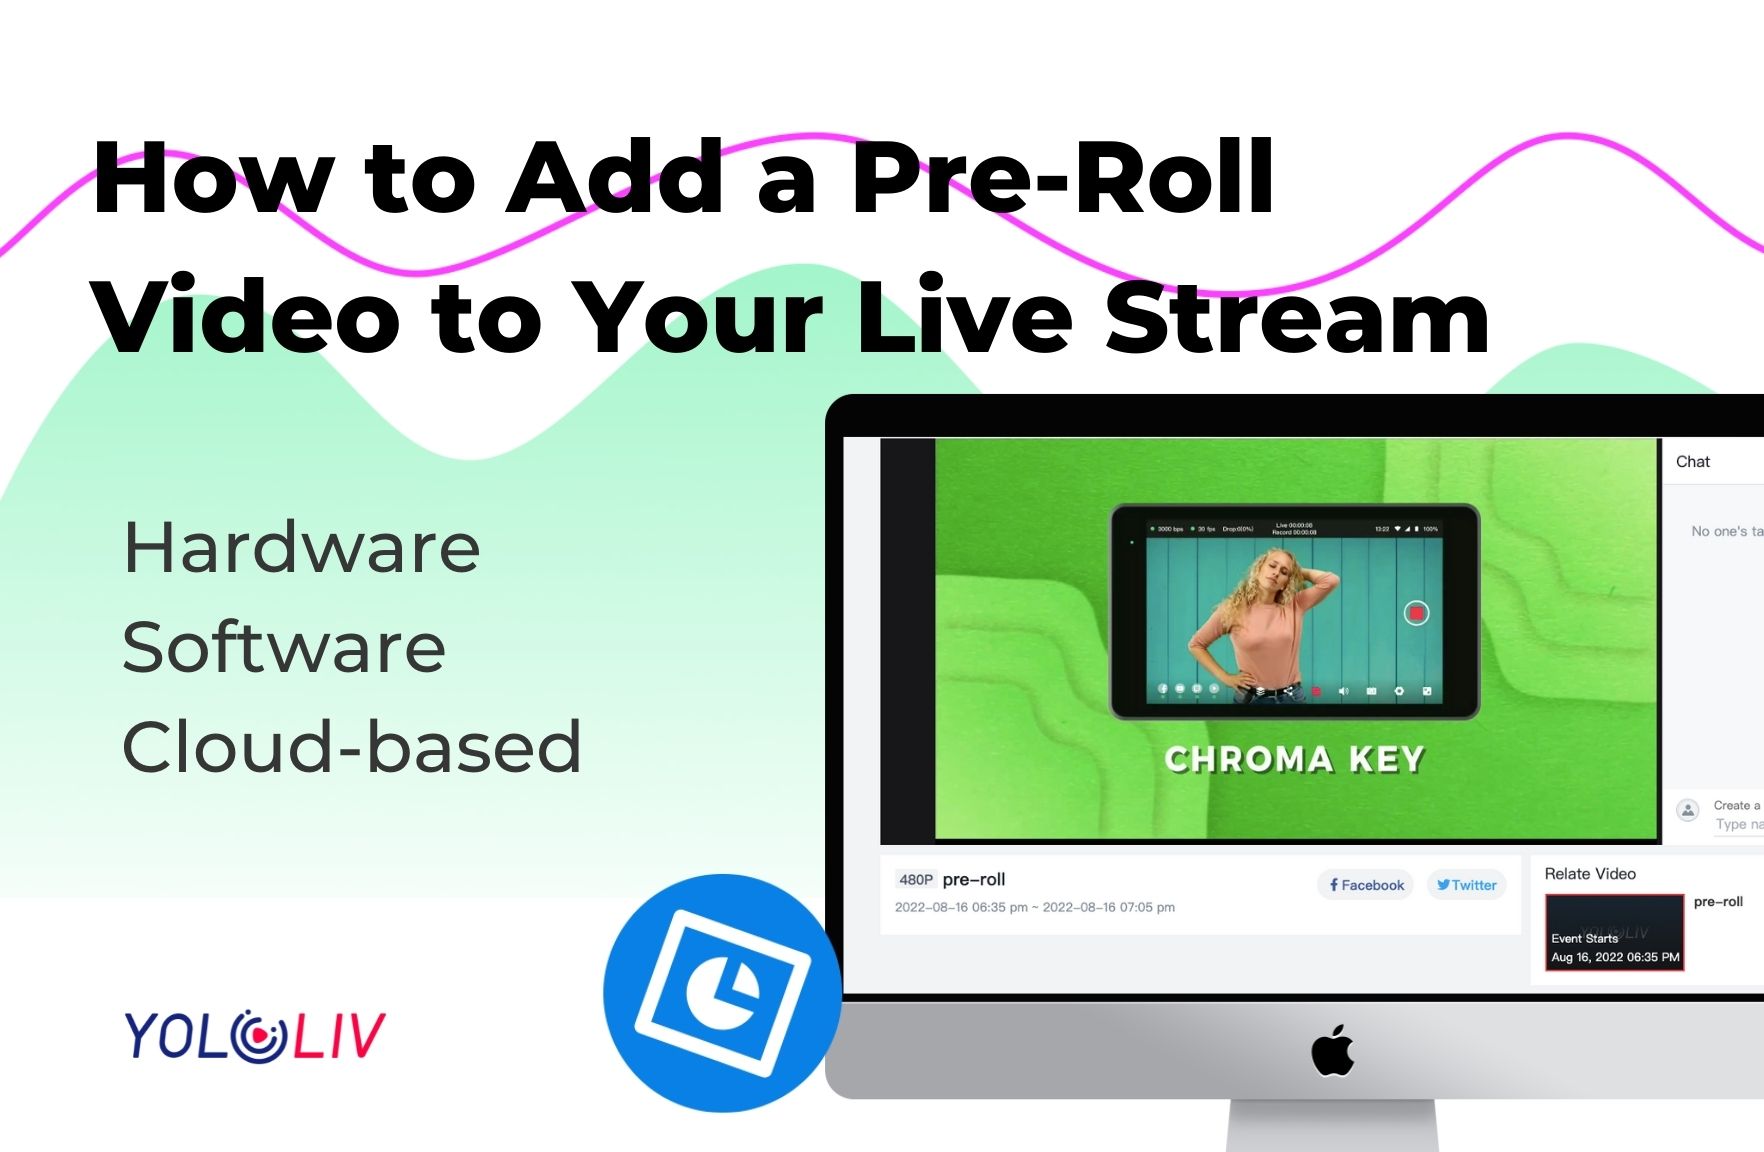 How to Add a Pre-Roll Video to Your Live Stream